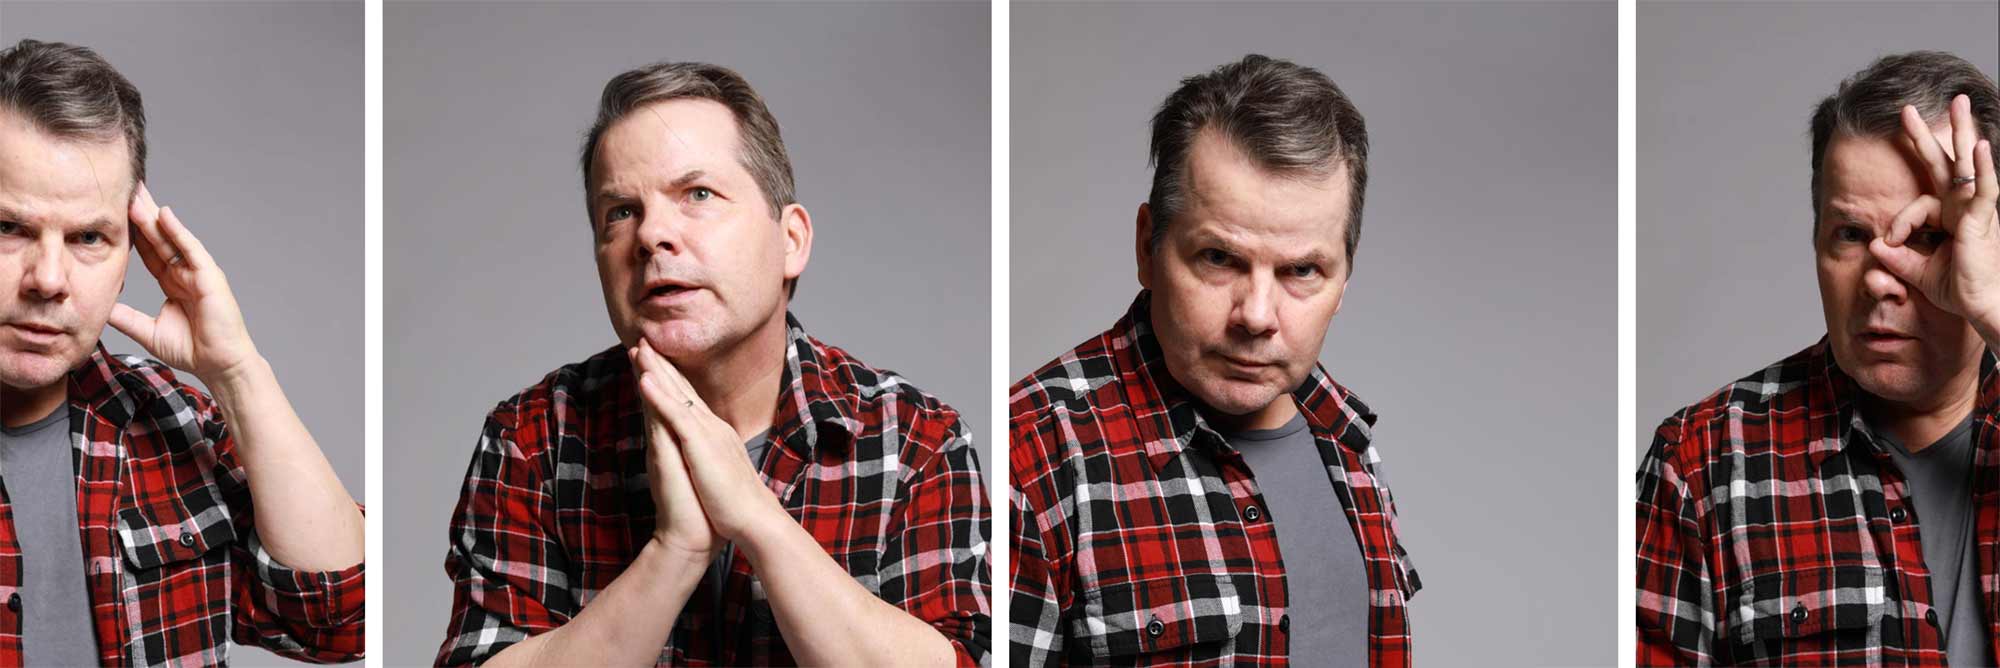 Photo of Bruce McCulloch with his hands pressed together as if in prayer. His chin rests gently against his hands.